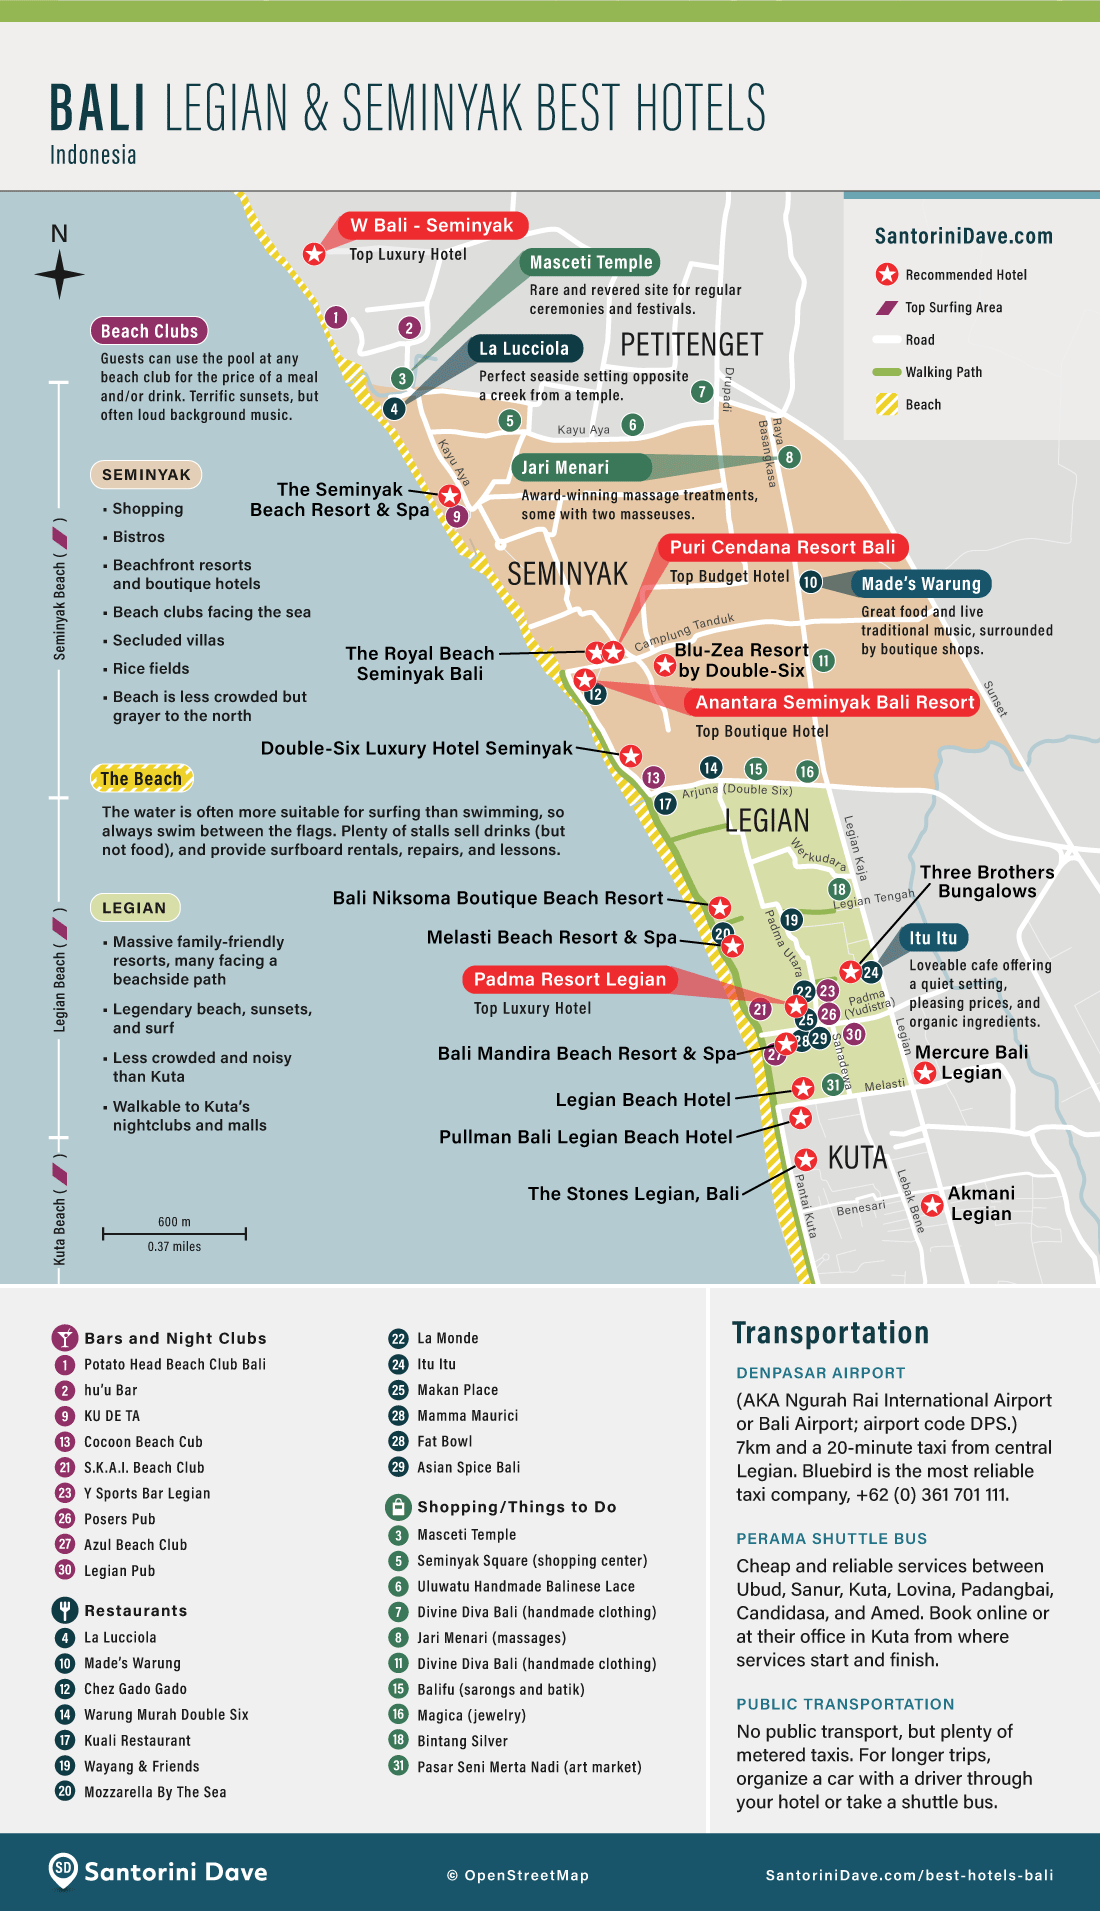 Map showing locations and descriptions of the best hotels in the Legian and Seminyak beach areas of Bali